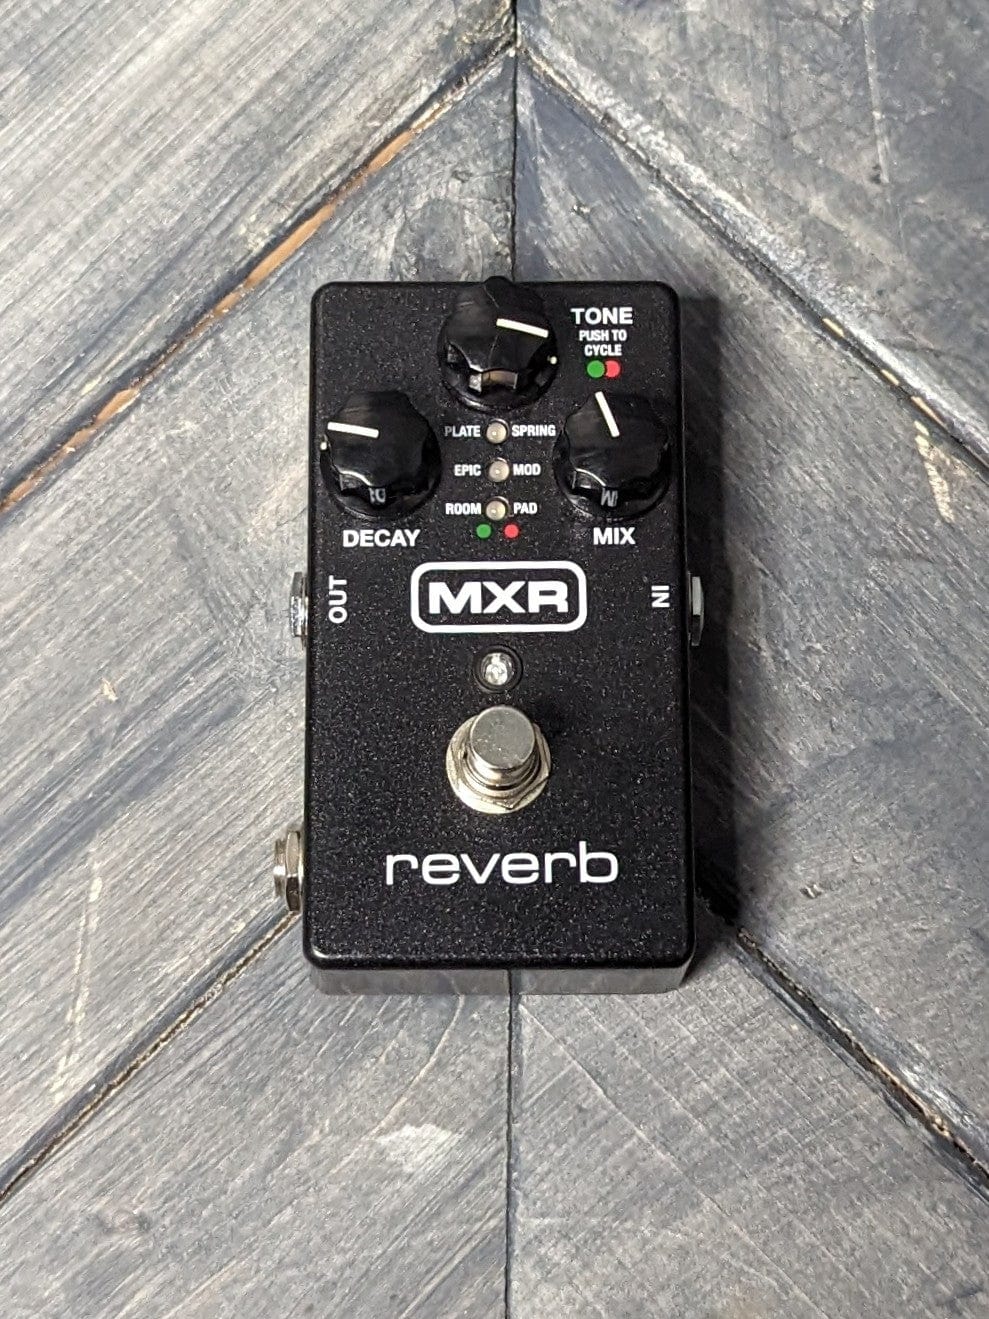 Used MXR M300 top of the pedal